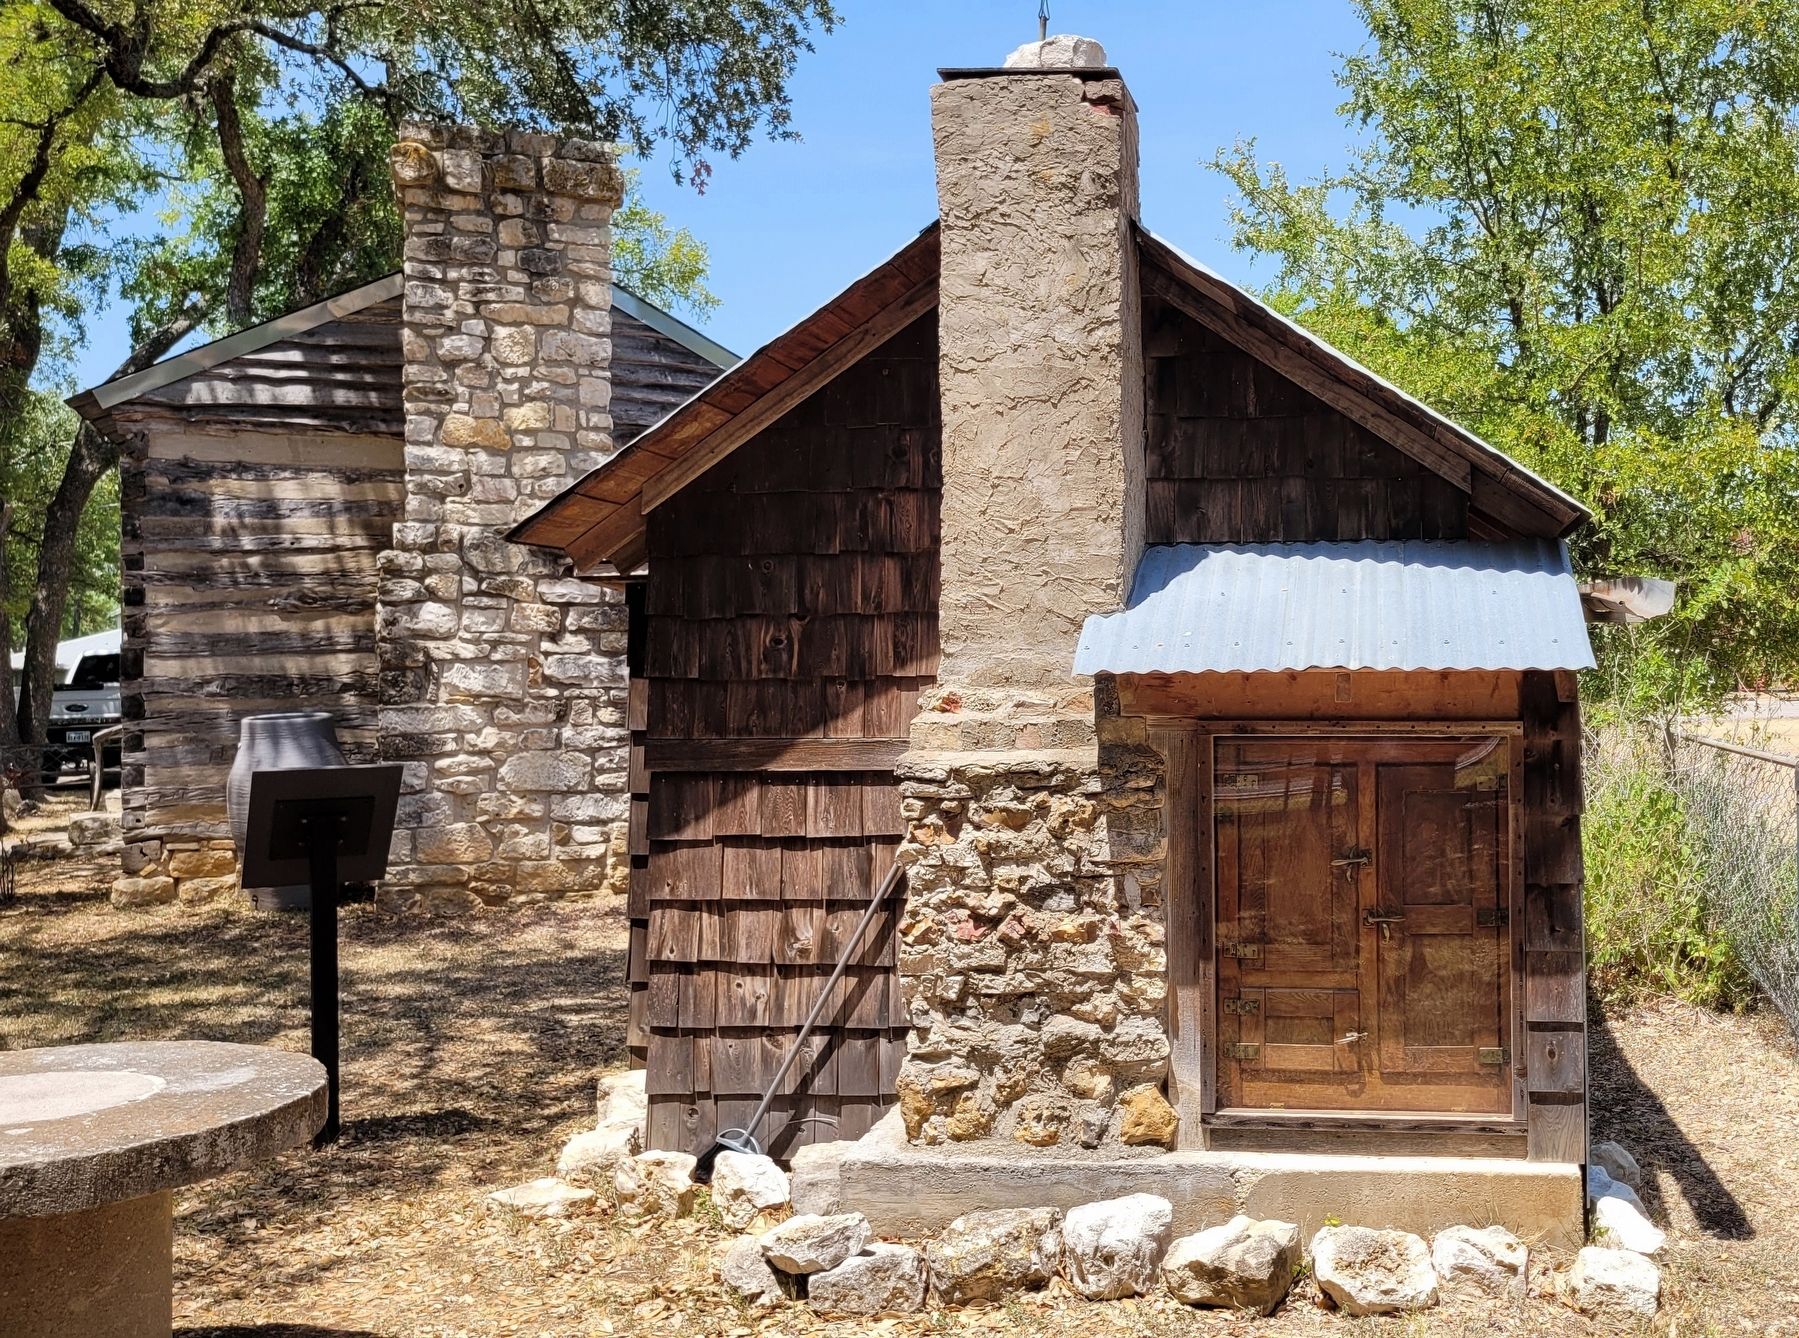 The side of the Writer's Cabin with the Icebox built in on the right image. Click for full size.